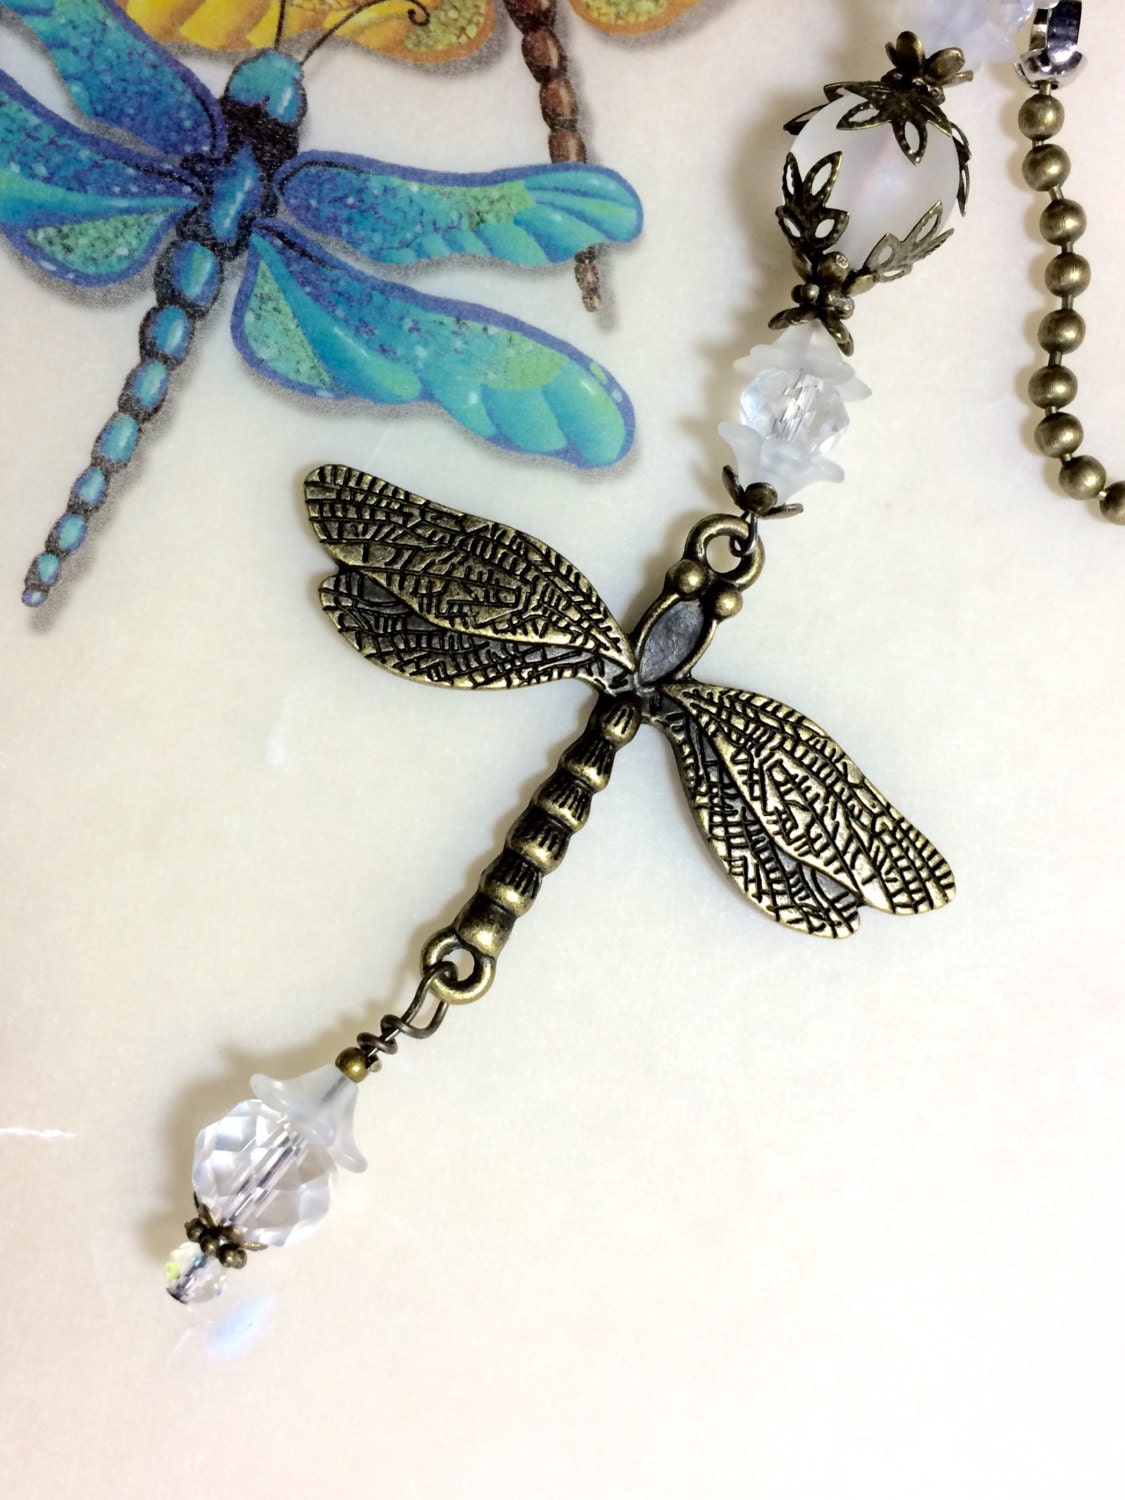 Dragonfly pull chain light pull ceiling fan pull ball chain